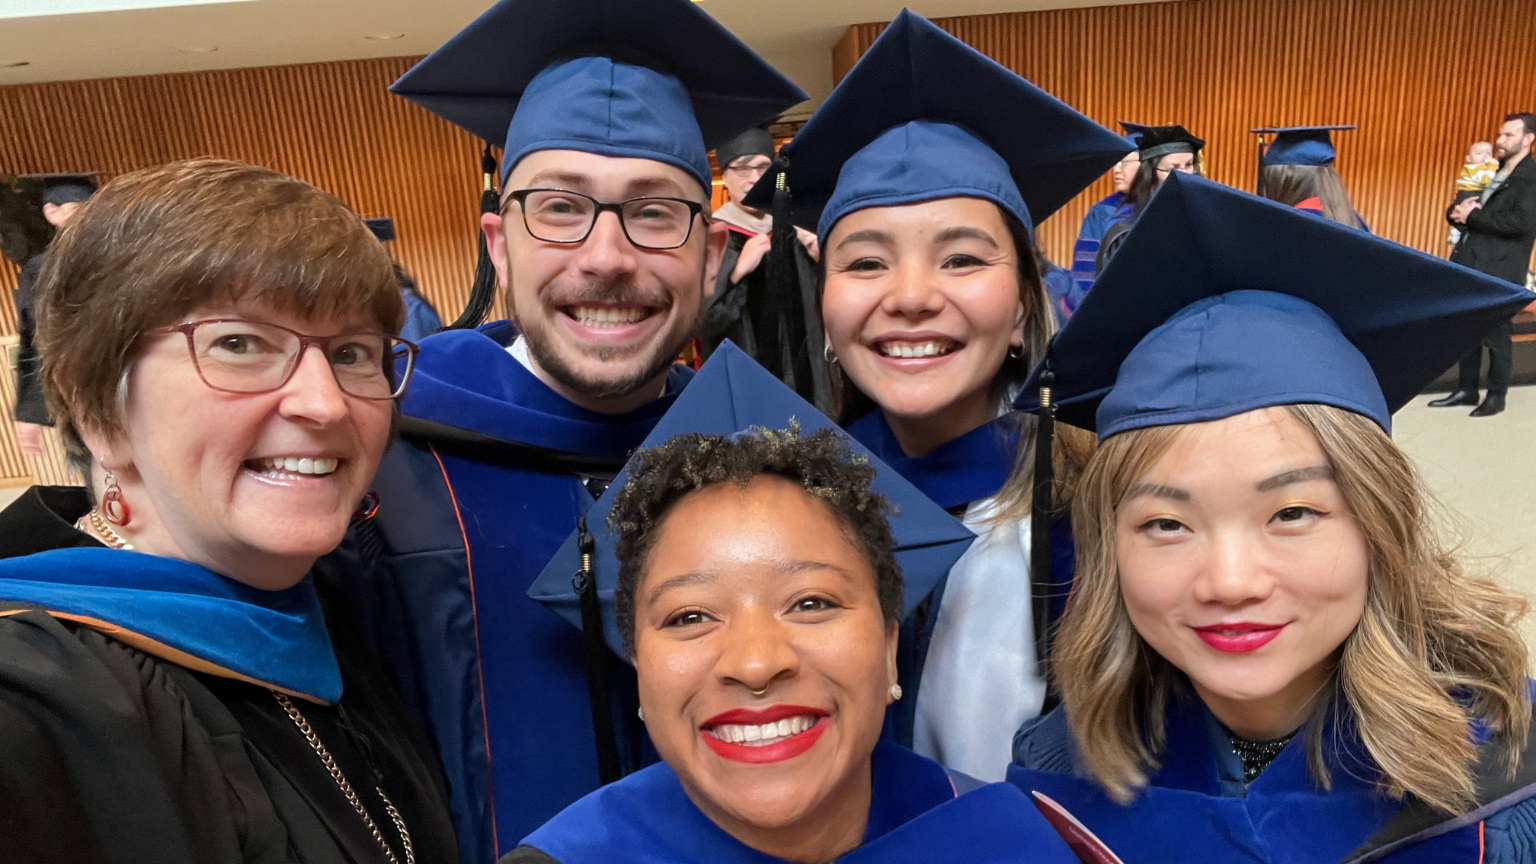 Four TechSAge students and Wendy Rogers at their hooding ceremony after receiving their PhDs from the University of Illinois Urbana-Champaign